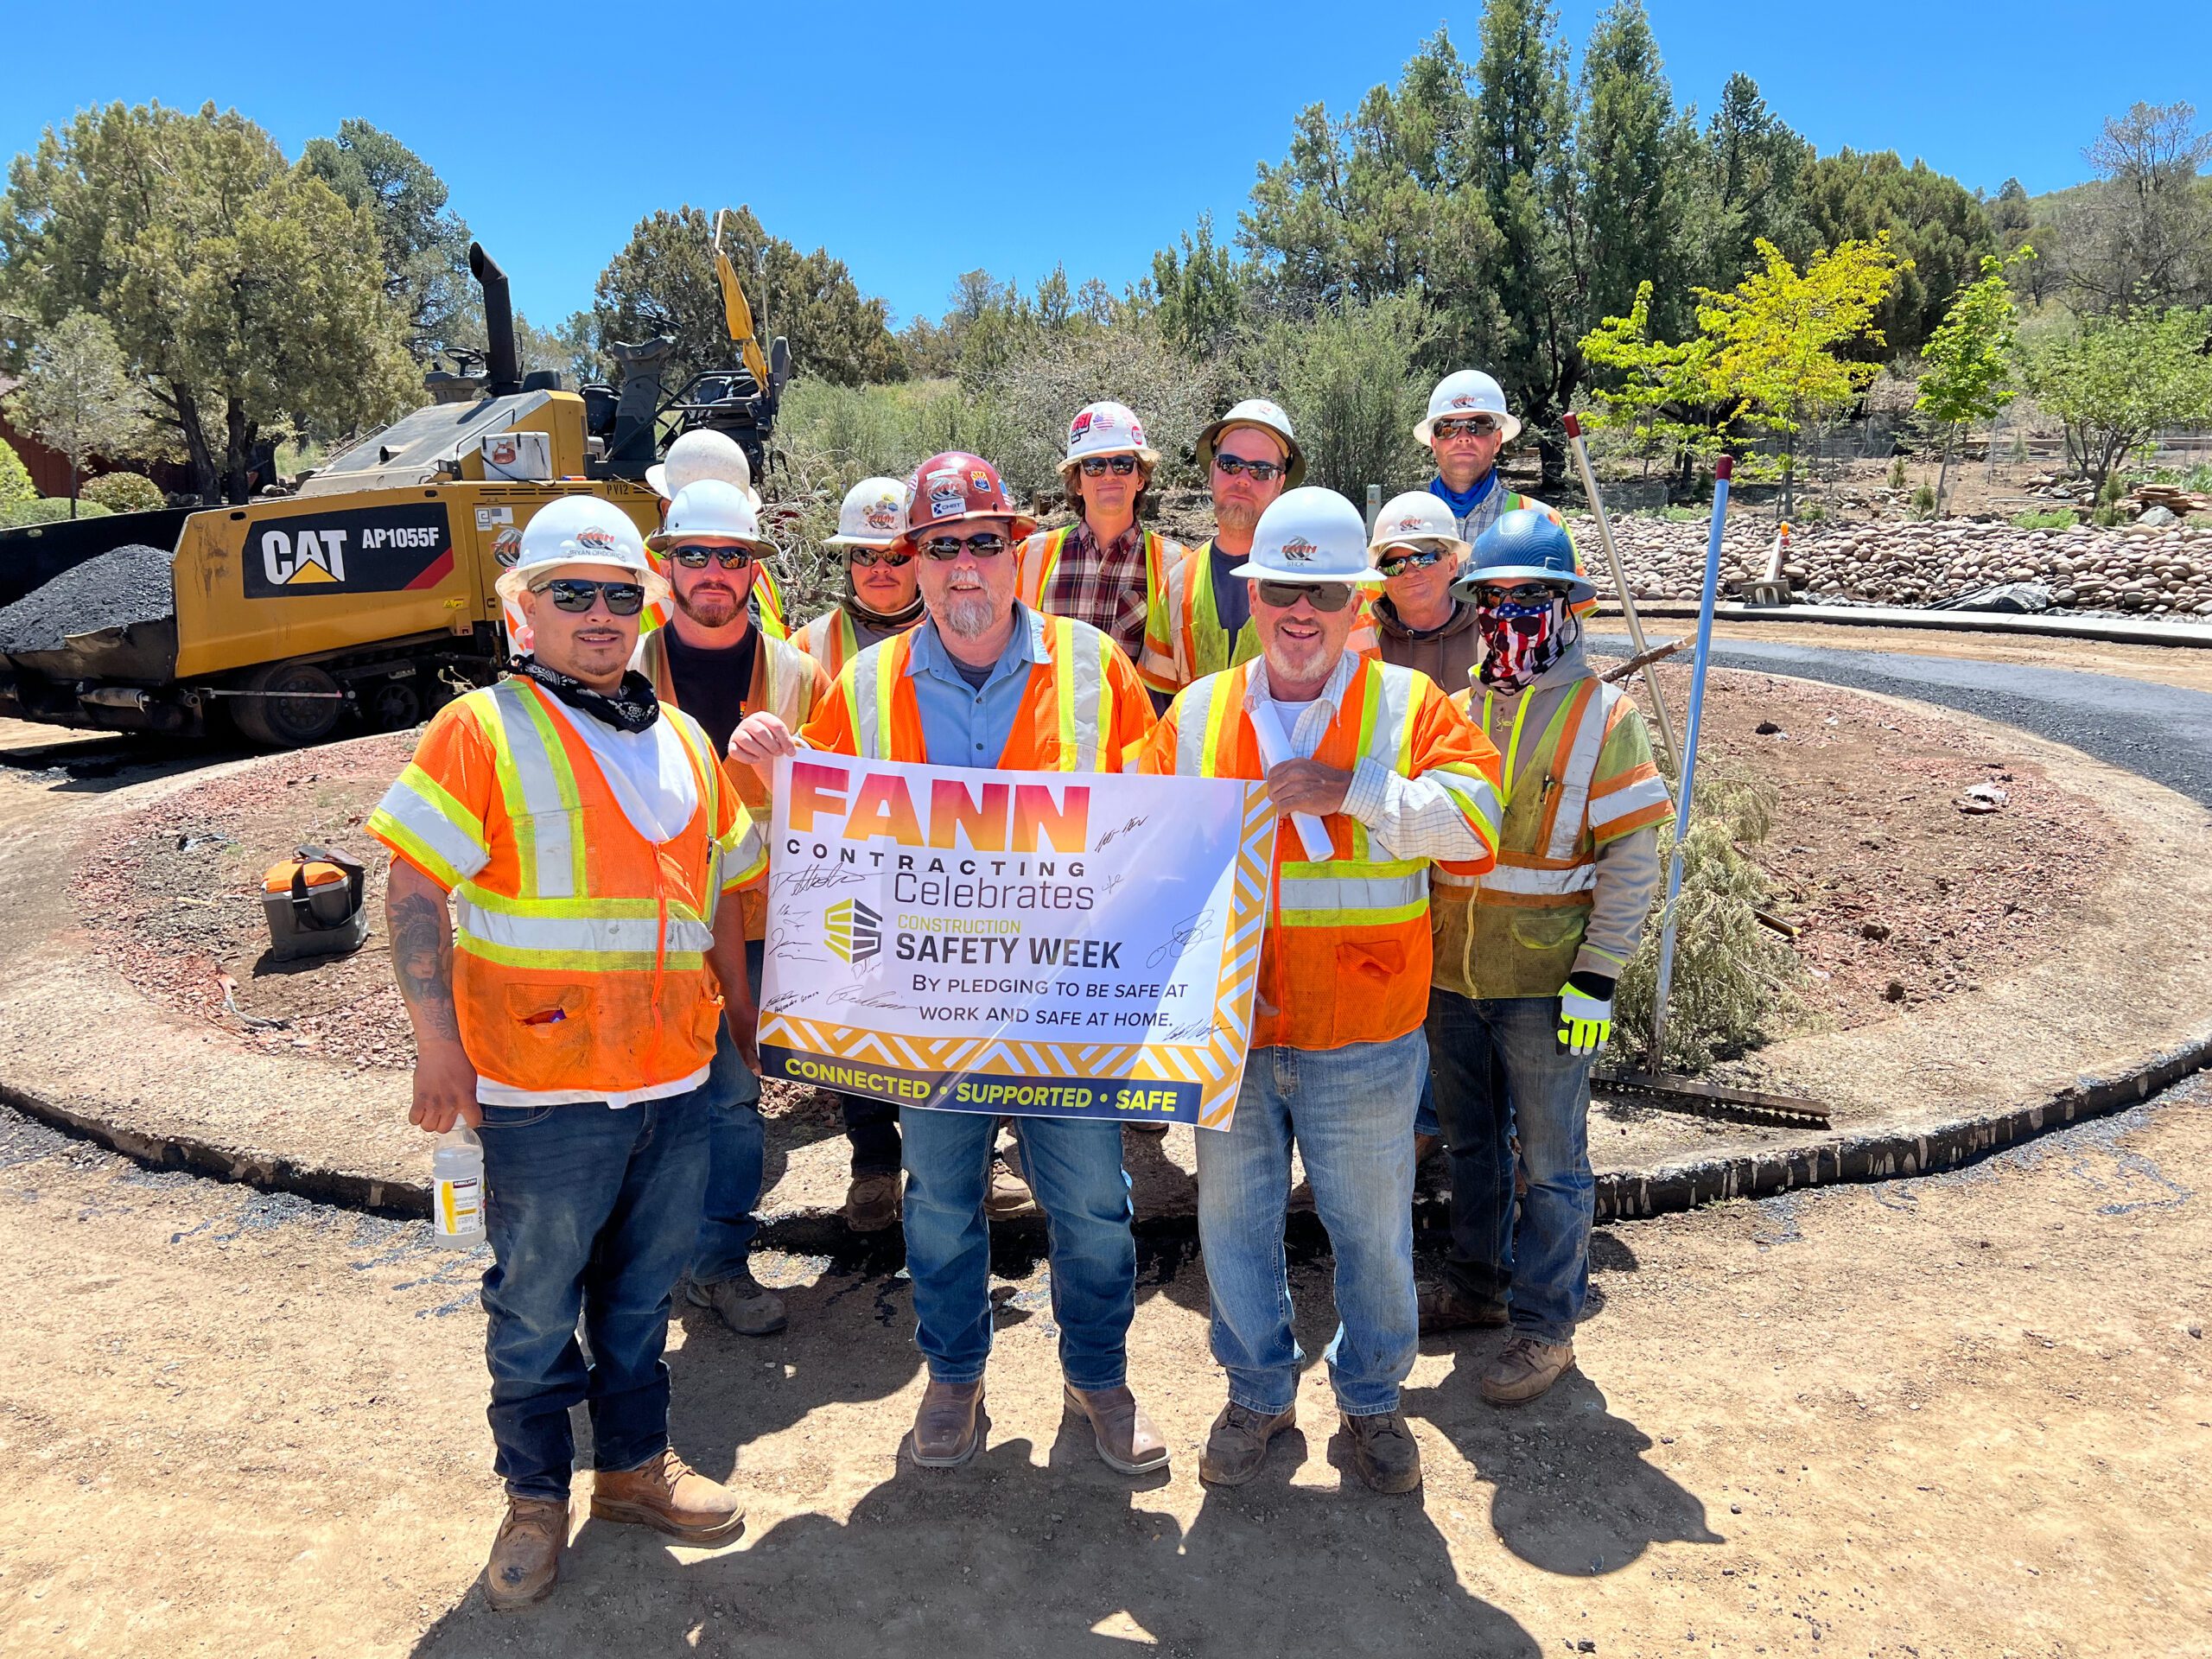 A group of construction workers celebrating Safety Week.